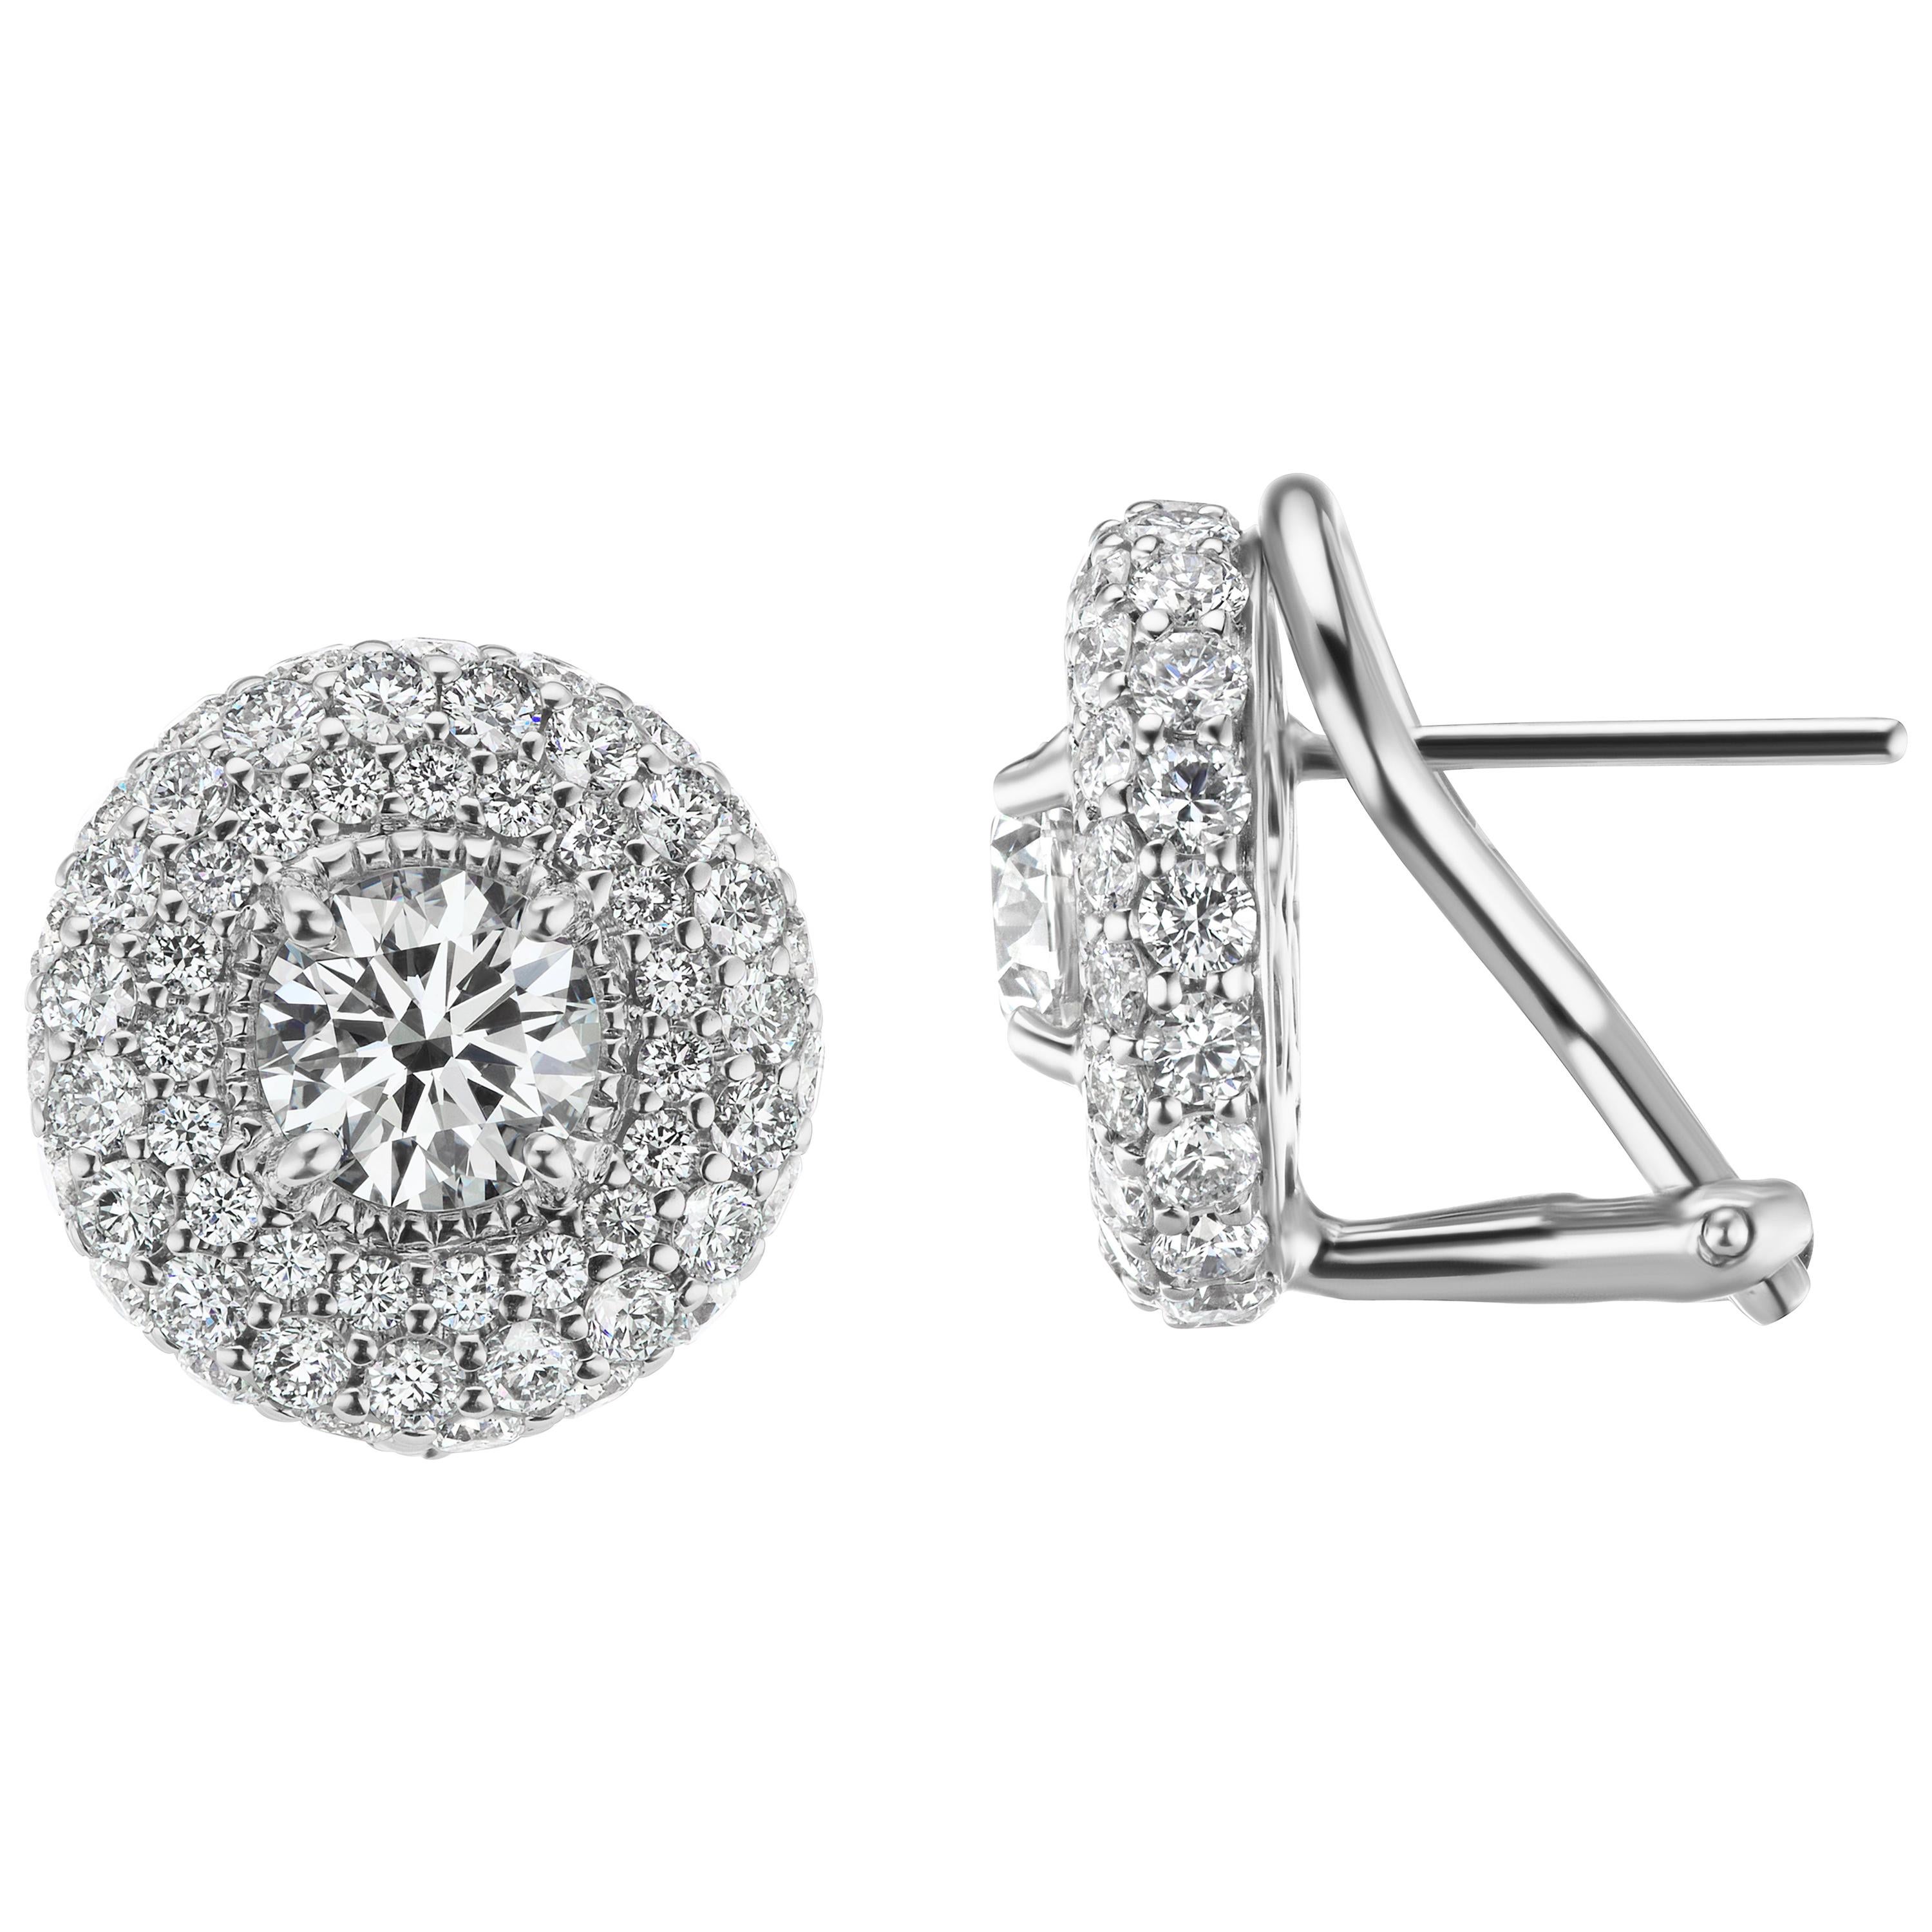 3.10 Carat Total Weight Round Halo Diamond Earrings in 18 Karat White Gold For Sale